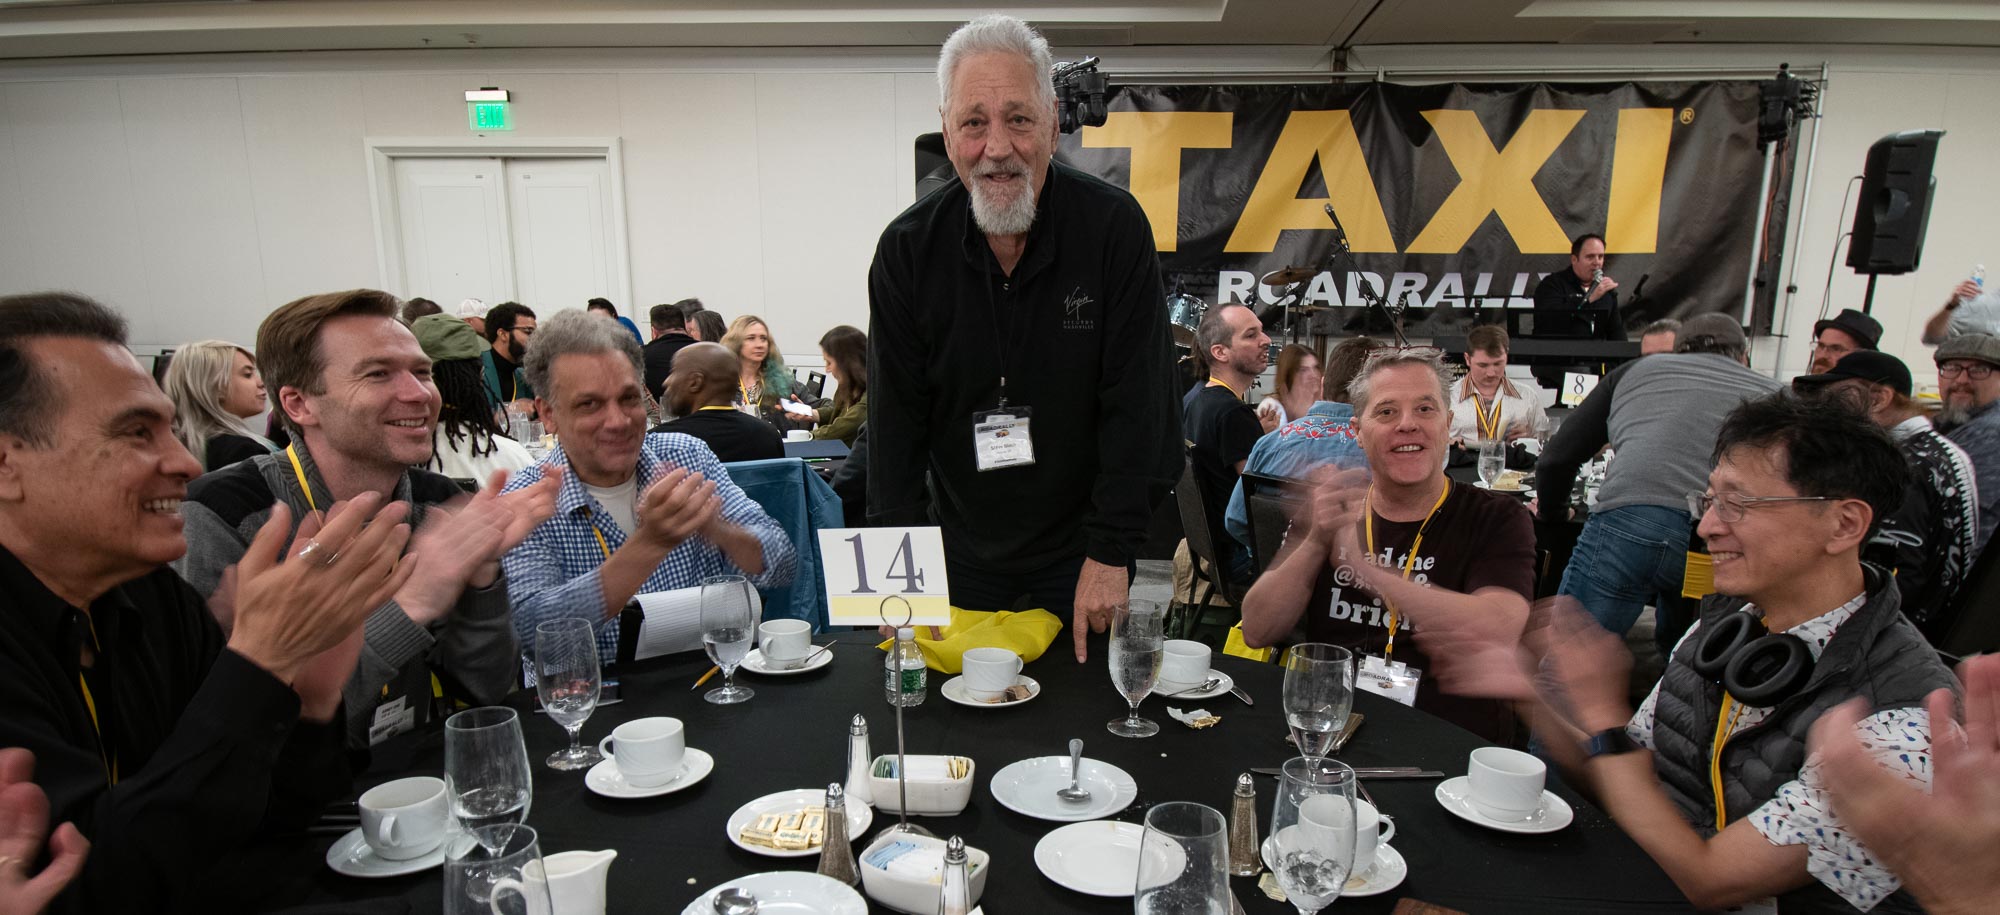 Music Row Publisher, Steve Bloch received a round of applause from some happy TAXI members as he wraps up his session at the Eat & Greet Luncheon.